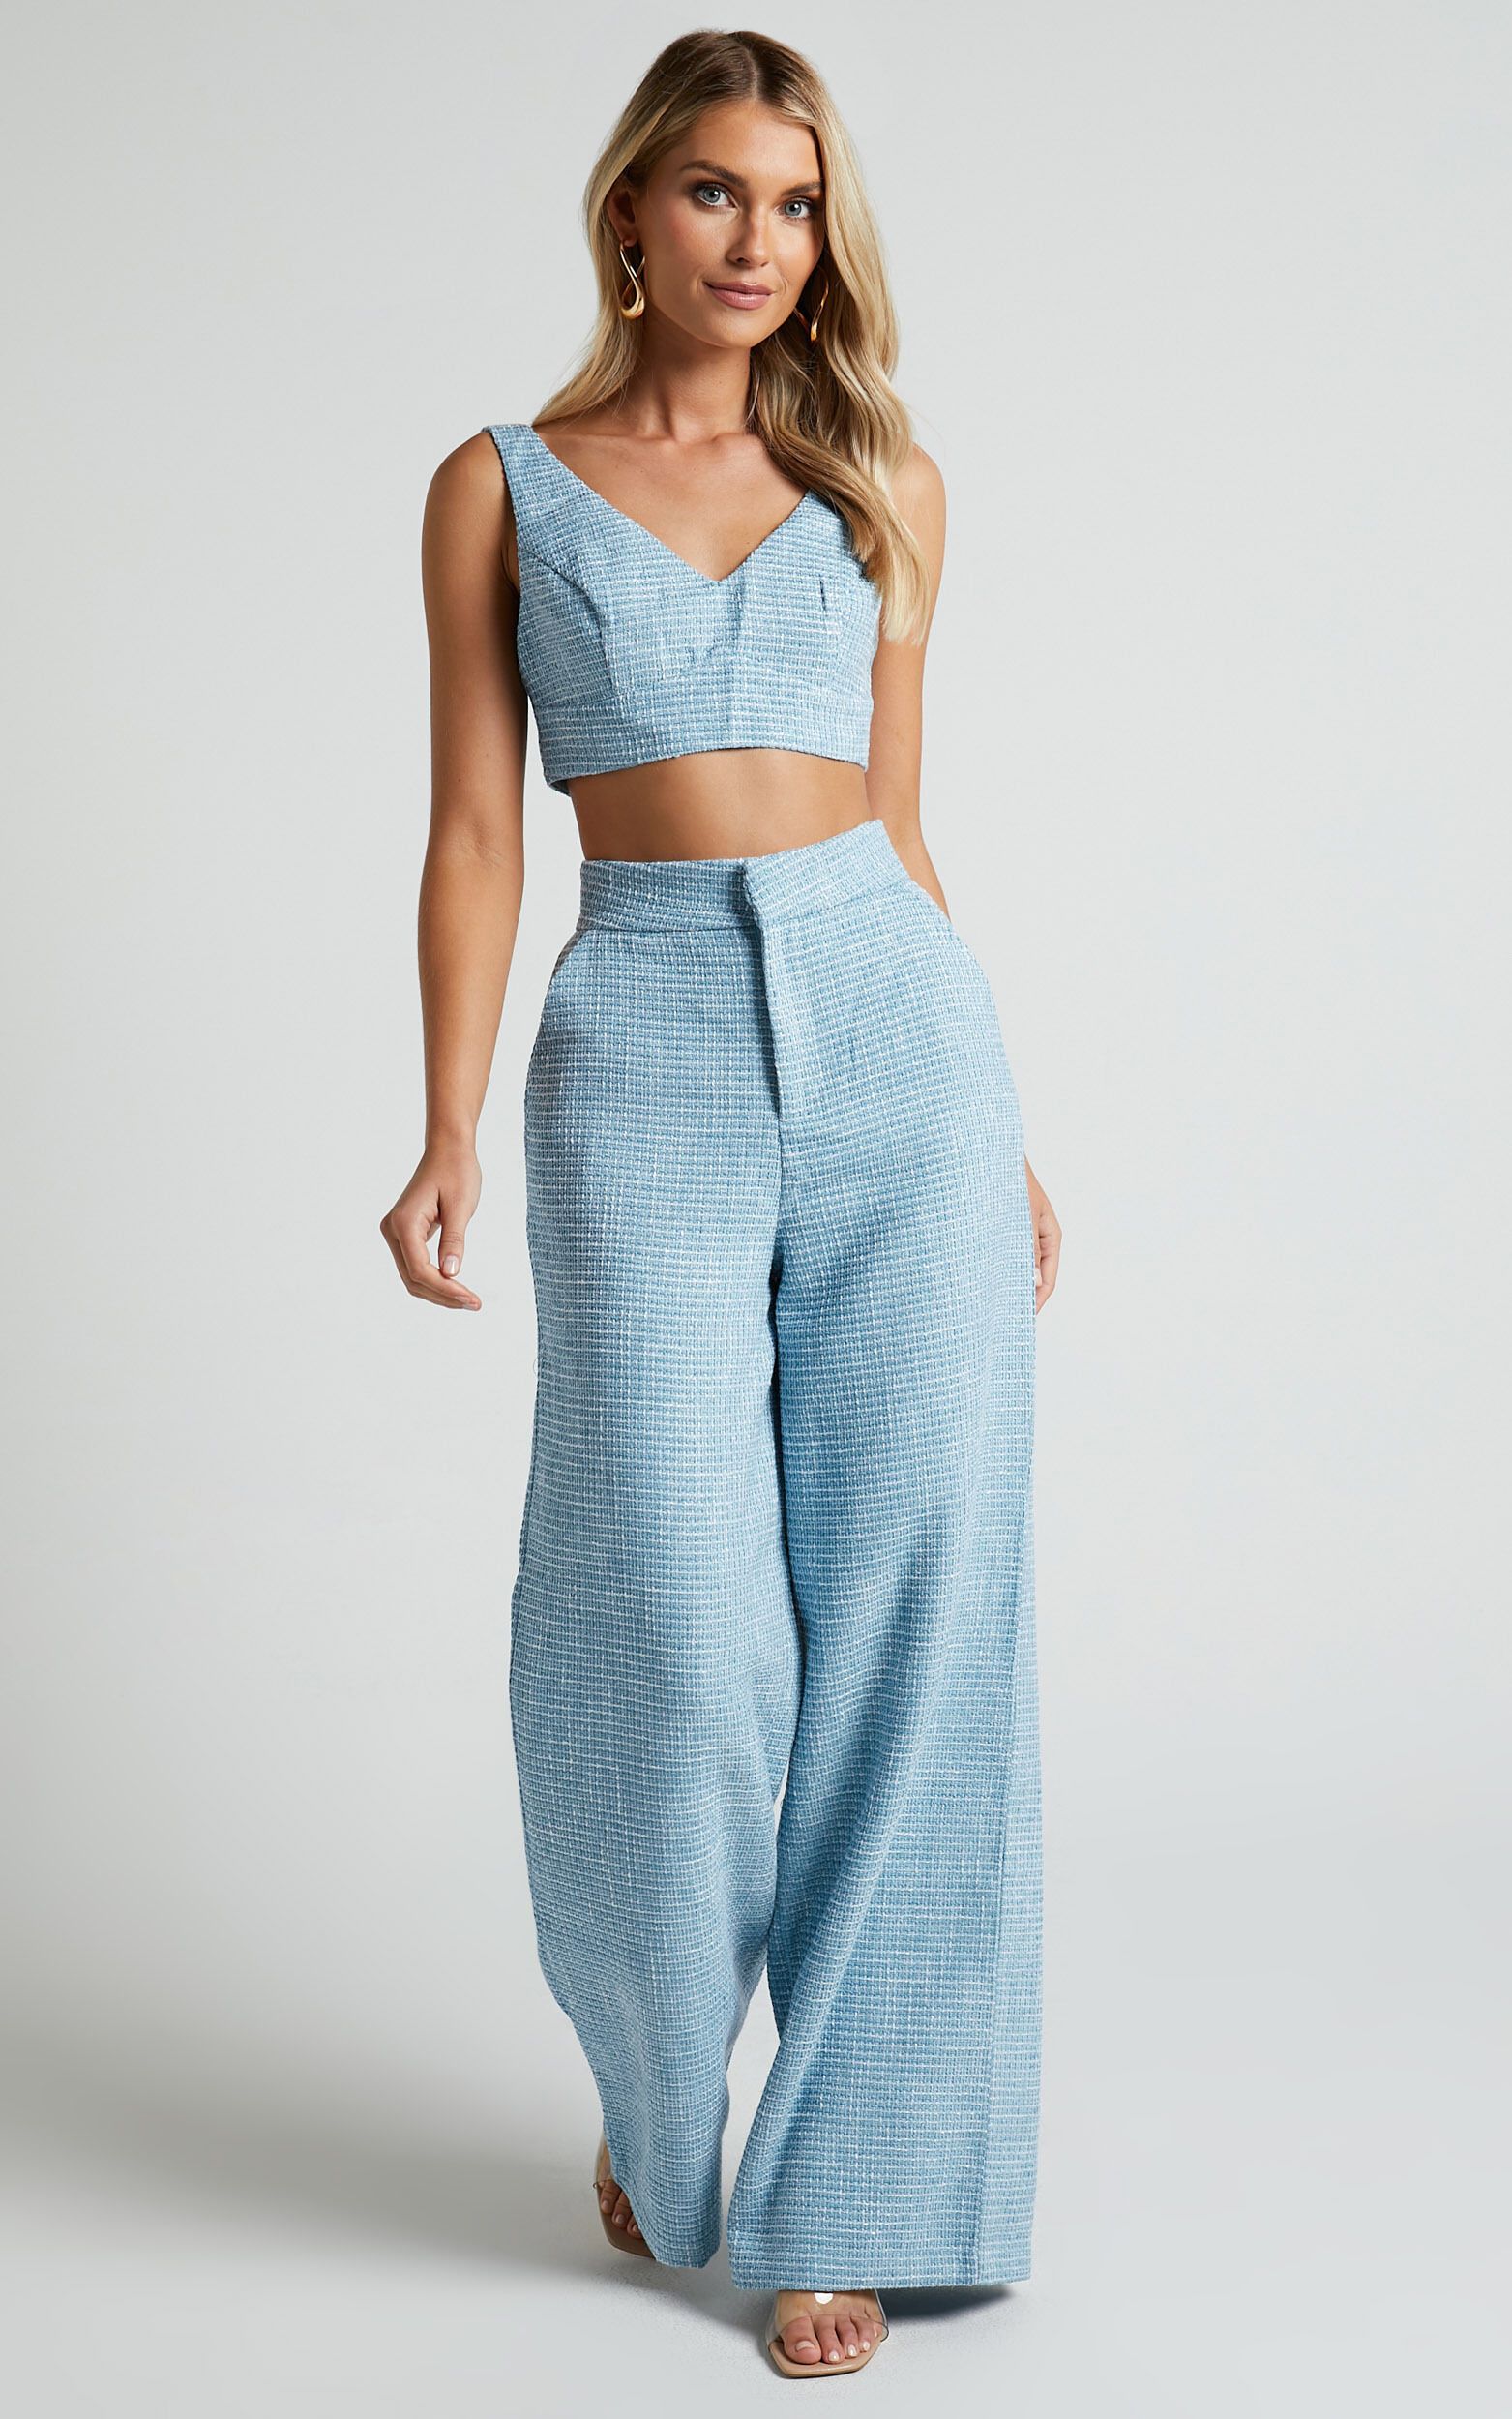 Adelaide Two Piece Set - Crop Top and Wide Leg Pants Set in Baby Blue | Showpo (US, UK & Europe)